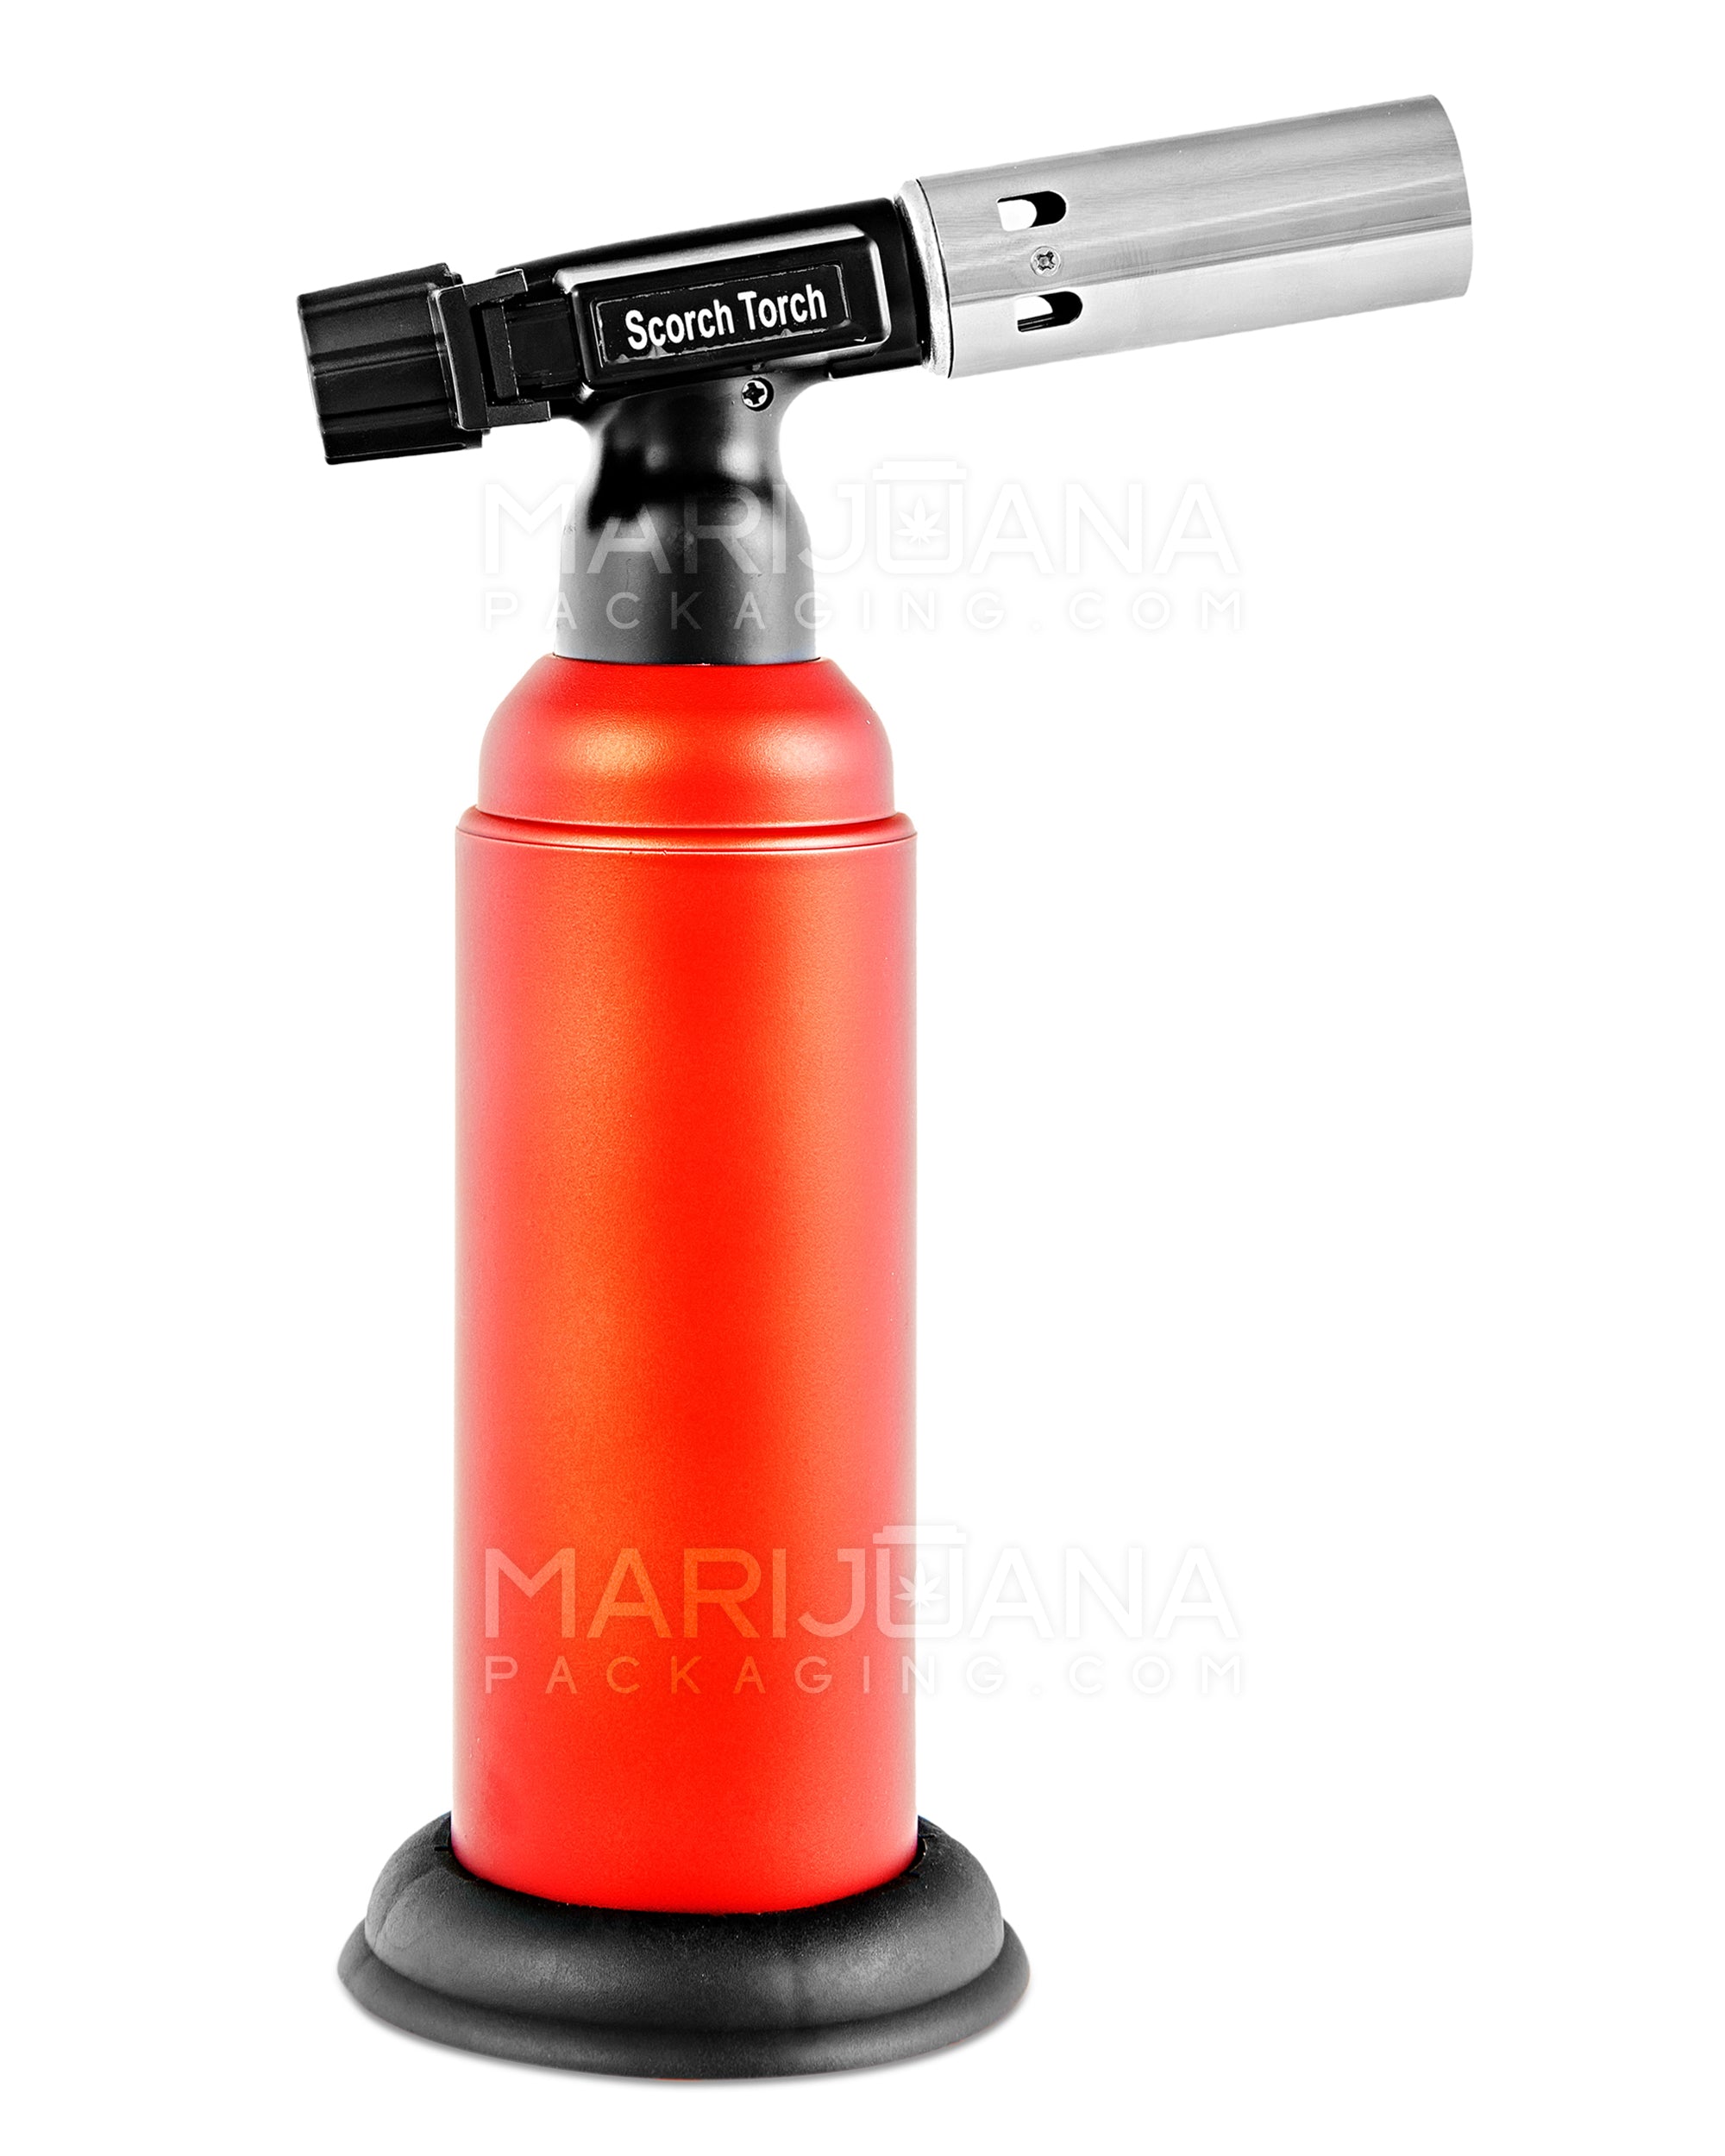 SCORCH TORCH | Metal Torch w/ Safety Lock | 8in Tall - Butane - Red - 1